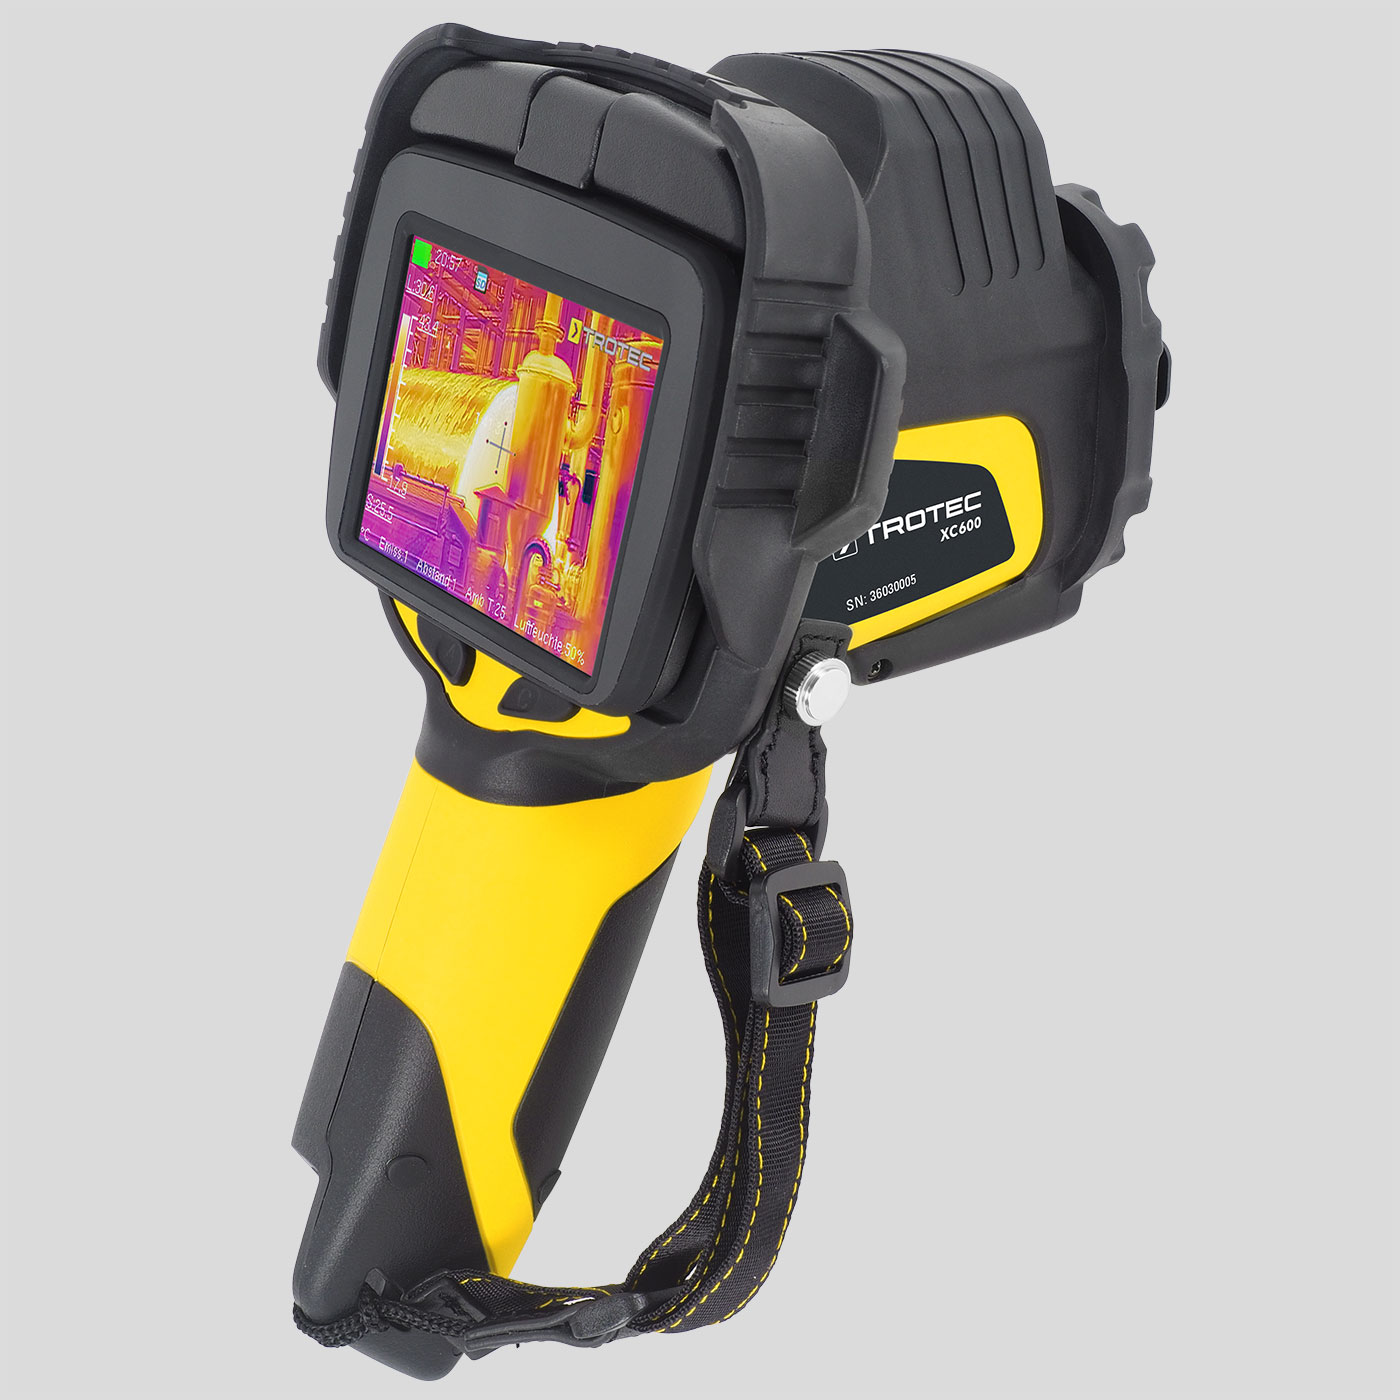 The innovative thermal imaging camera XC600 combines comfort and efficiency